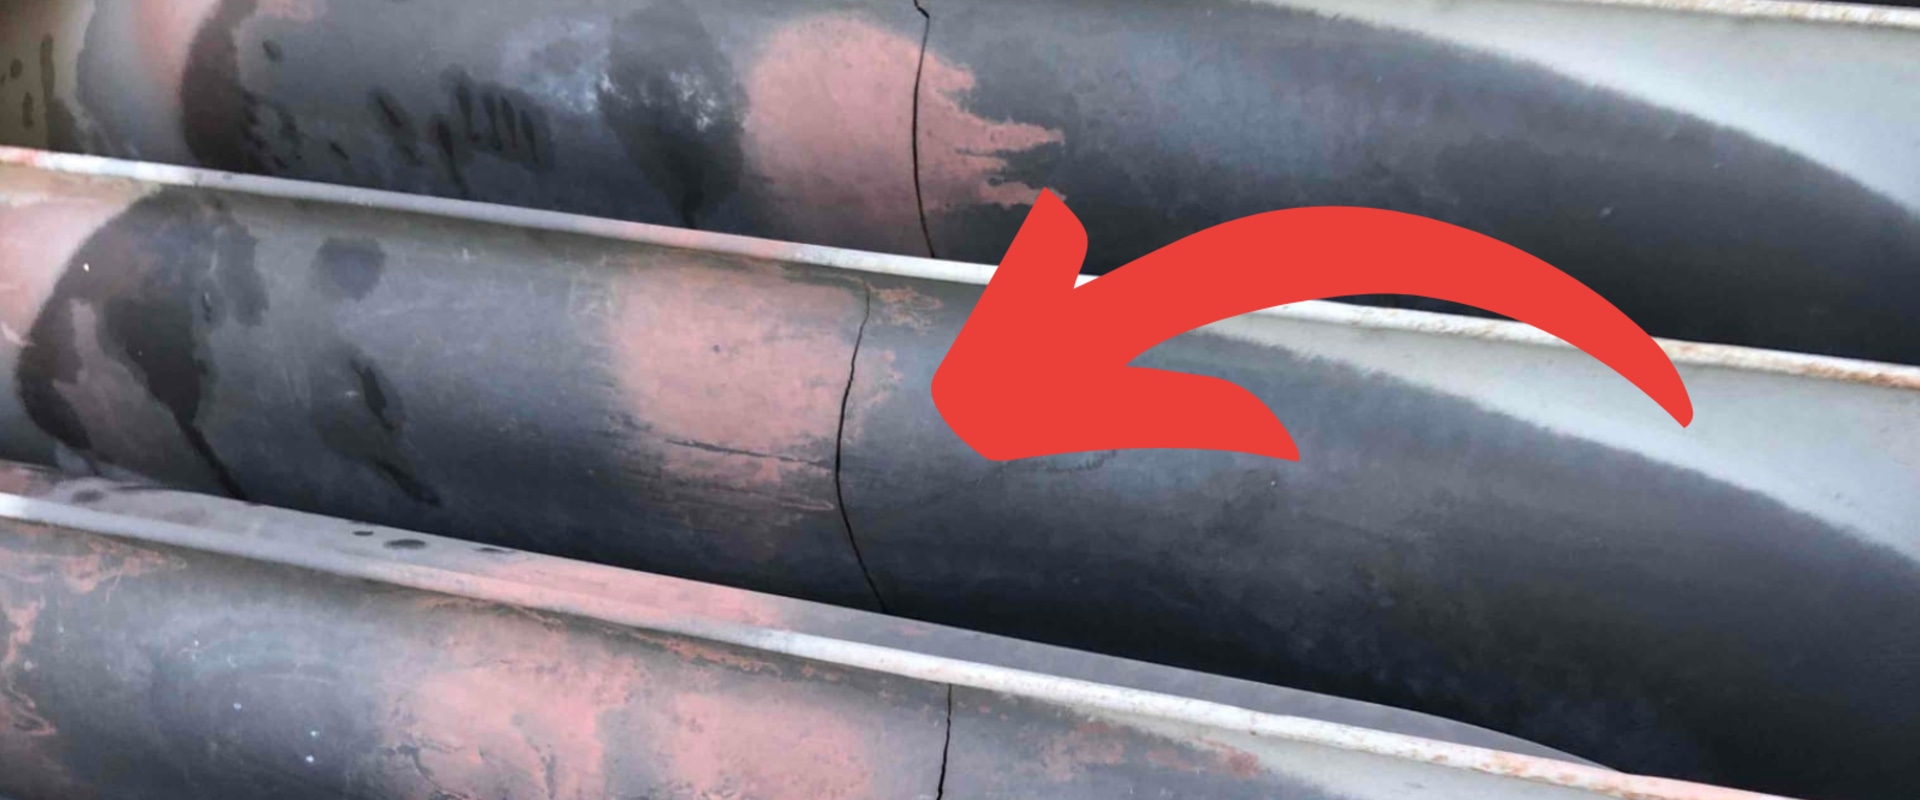 Is a cracked heat exchanger fixable?